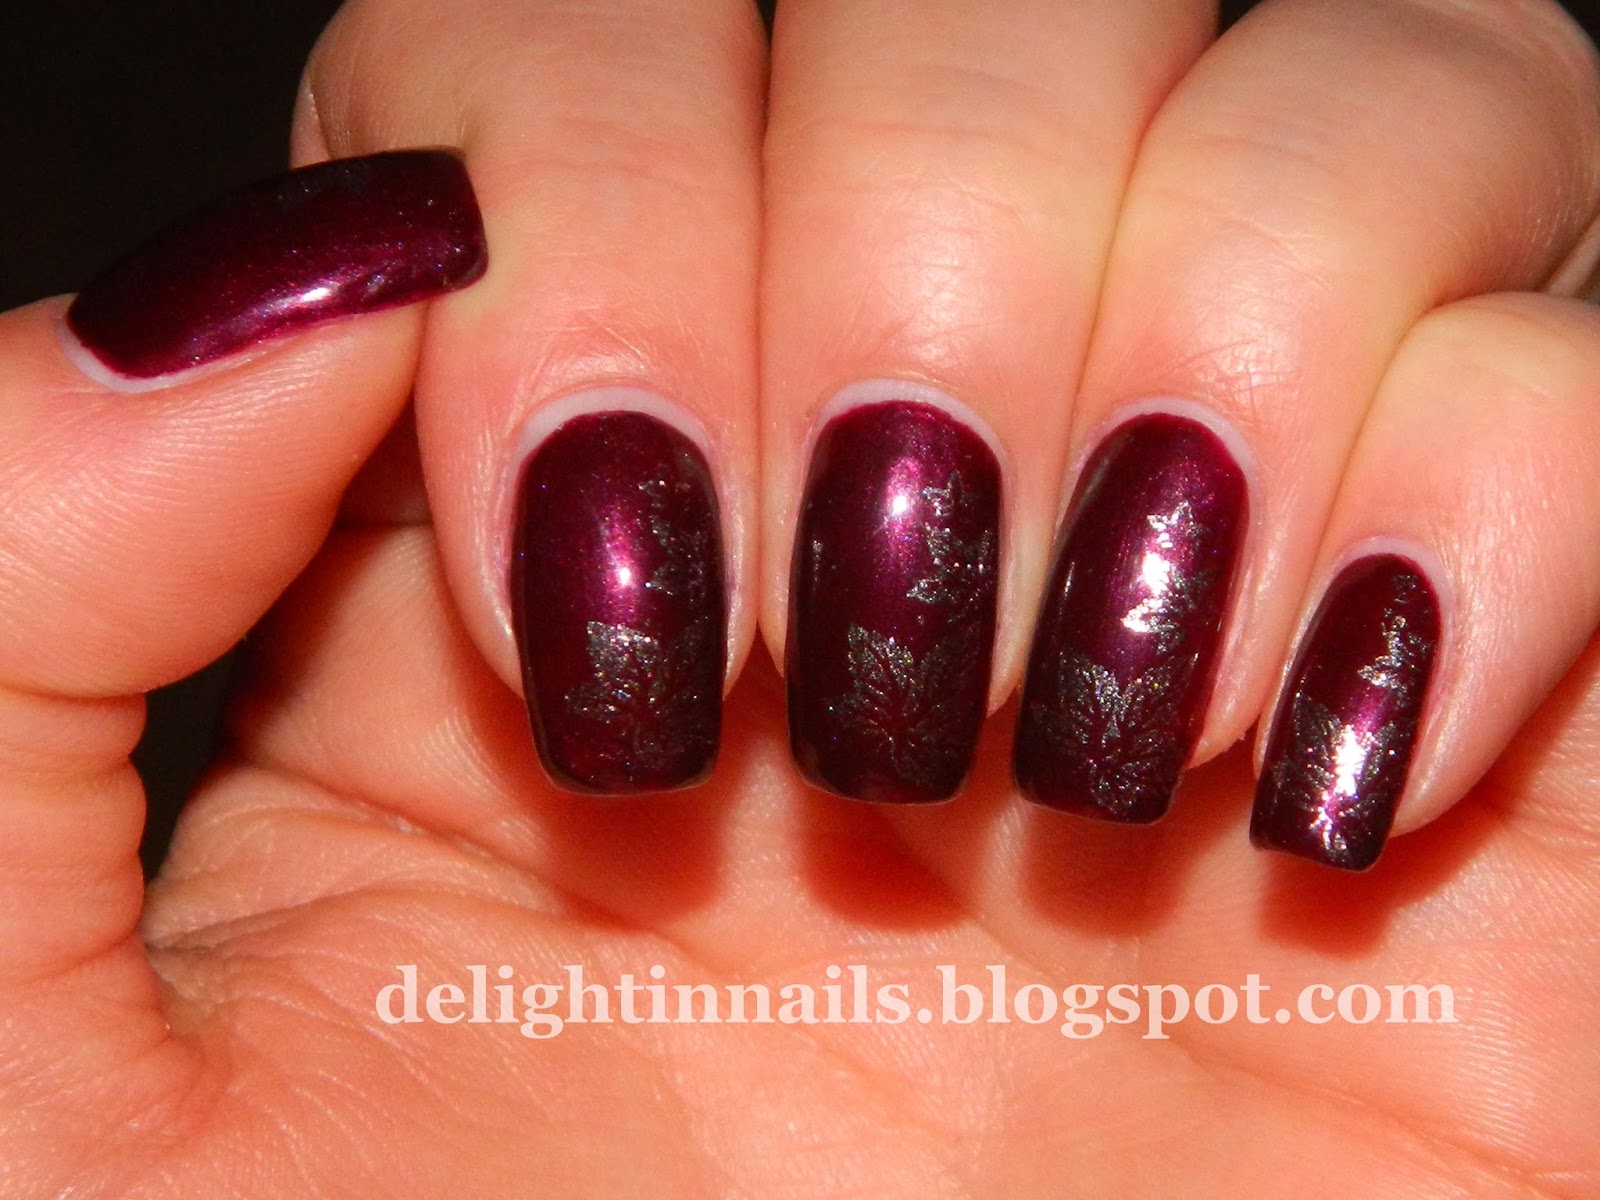 Delight In Nails: Thanksgiving Nails ft. OPI Black Magic Mountain